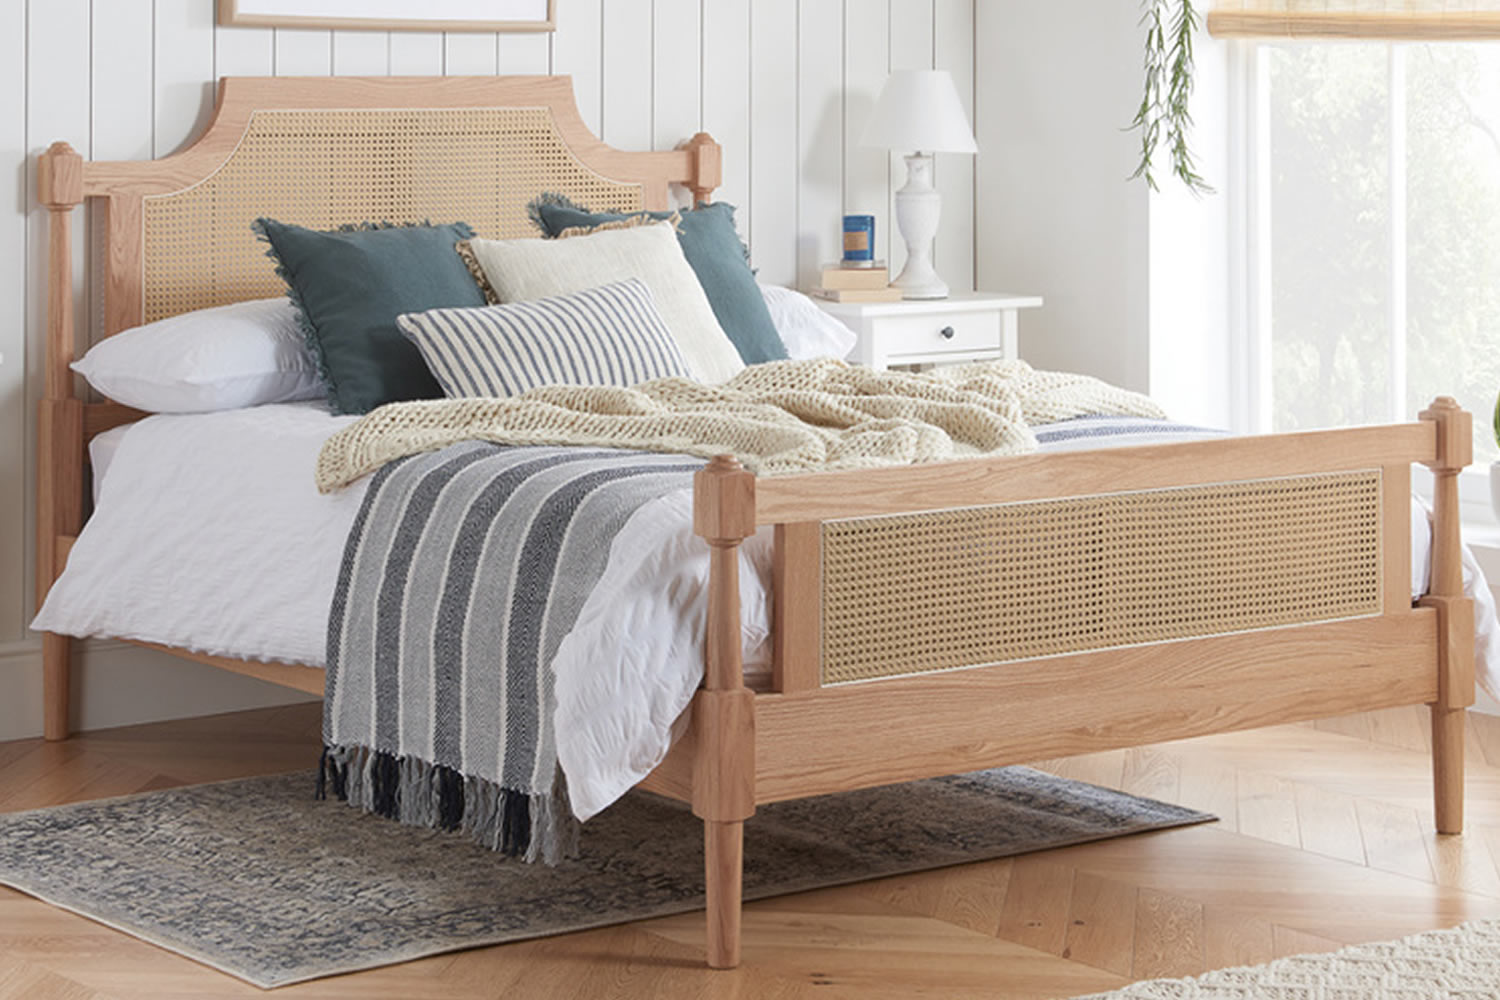 View Geneva 50 King Size Wooden Bed Frame Crafted From Solid Oak Rattan Headboard High Foot End Sturdy Legs Sprung Slatted Base information